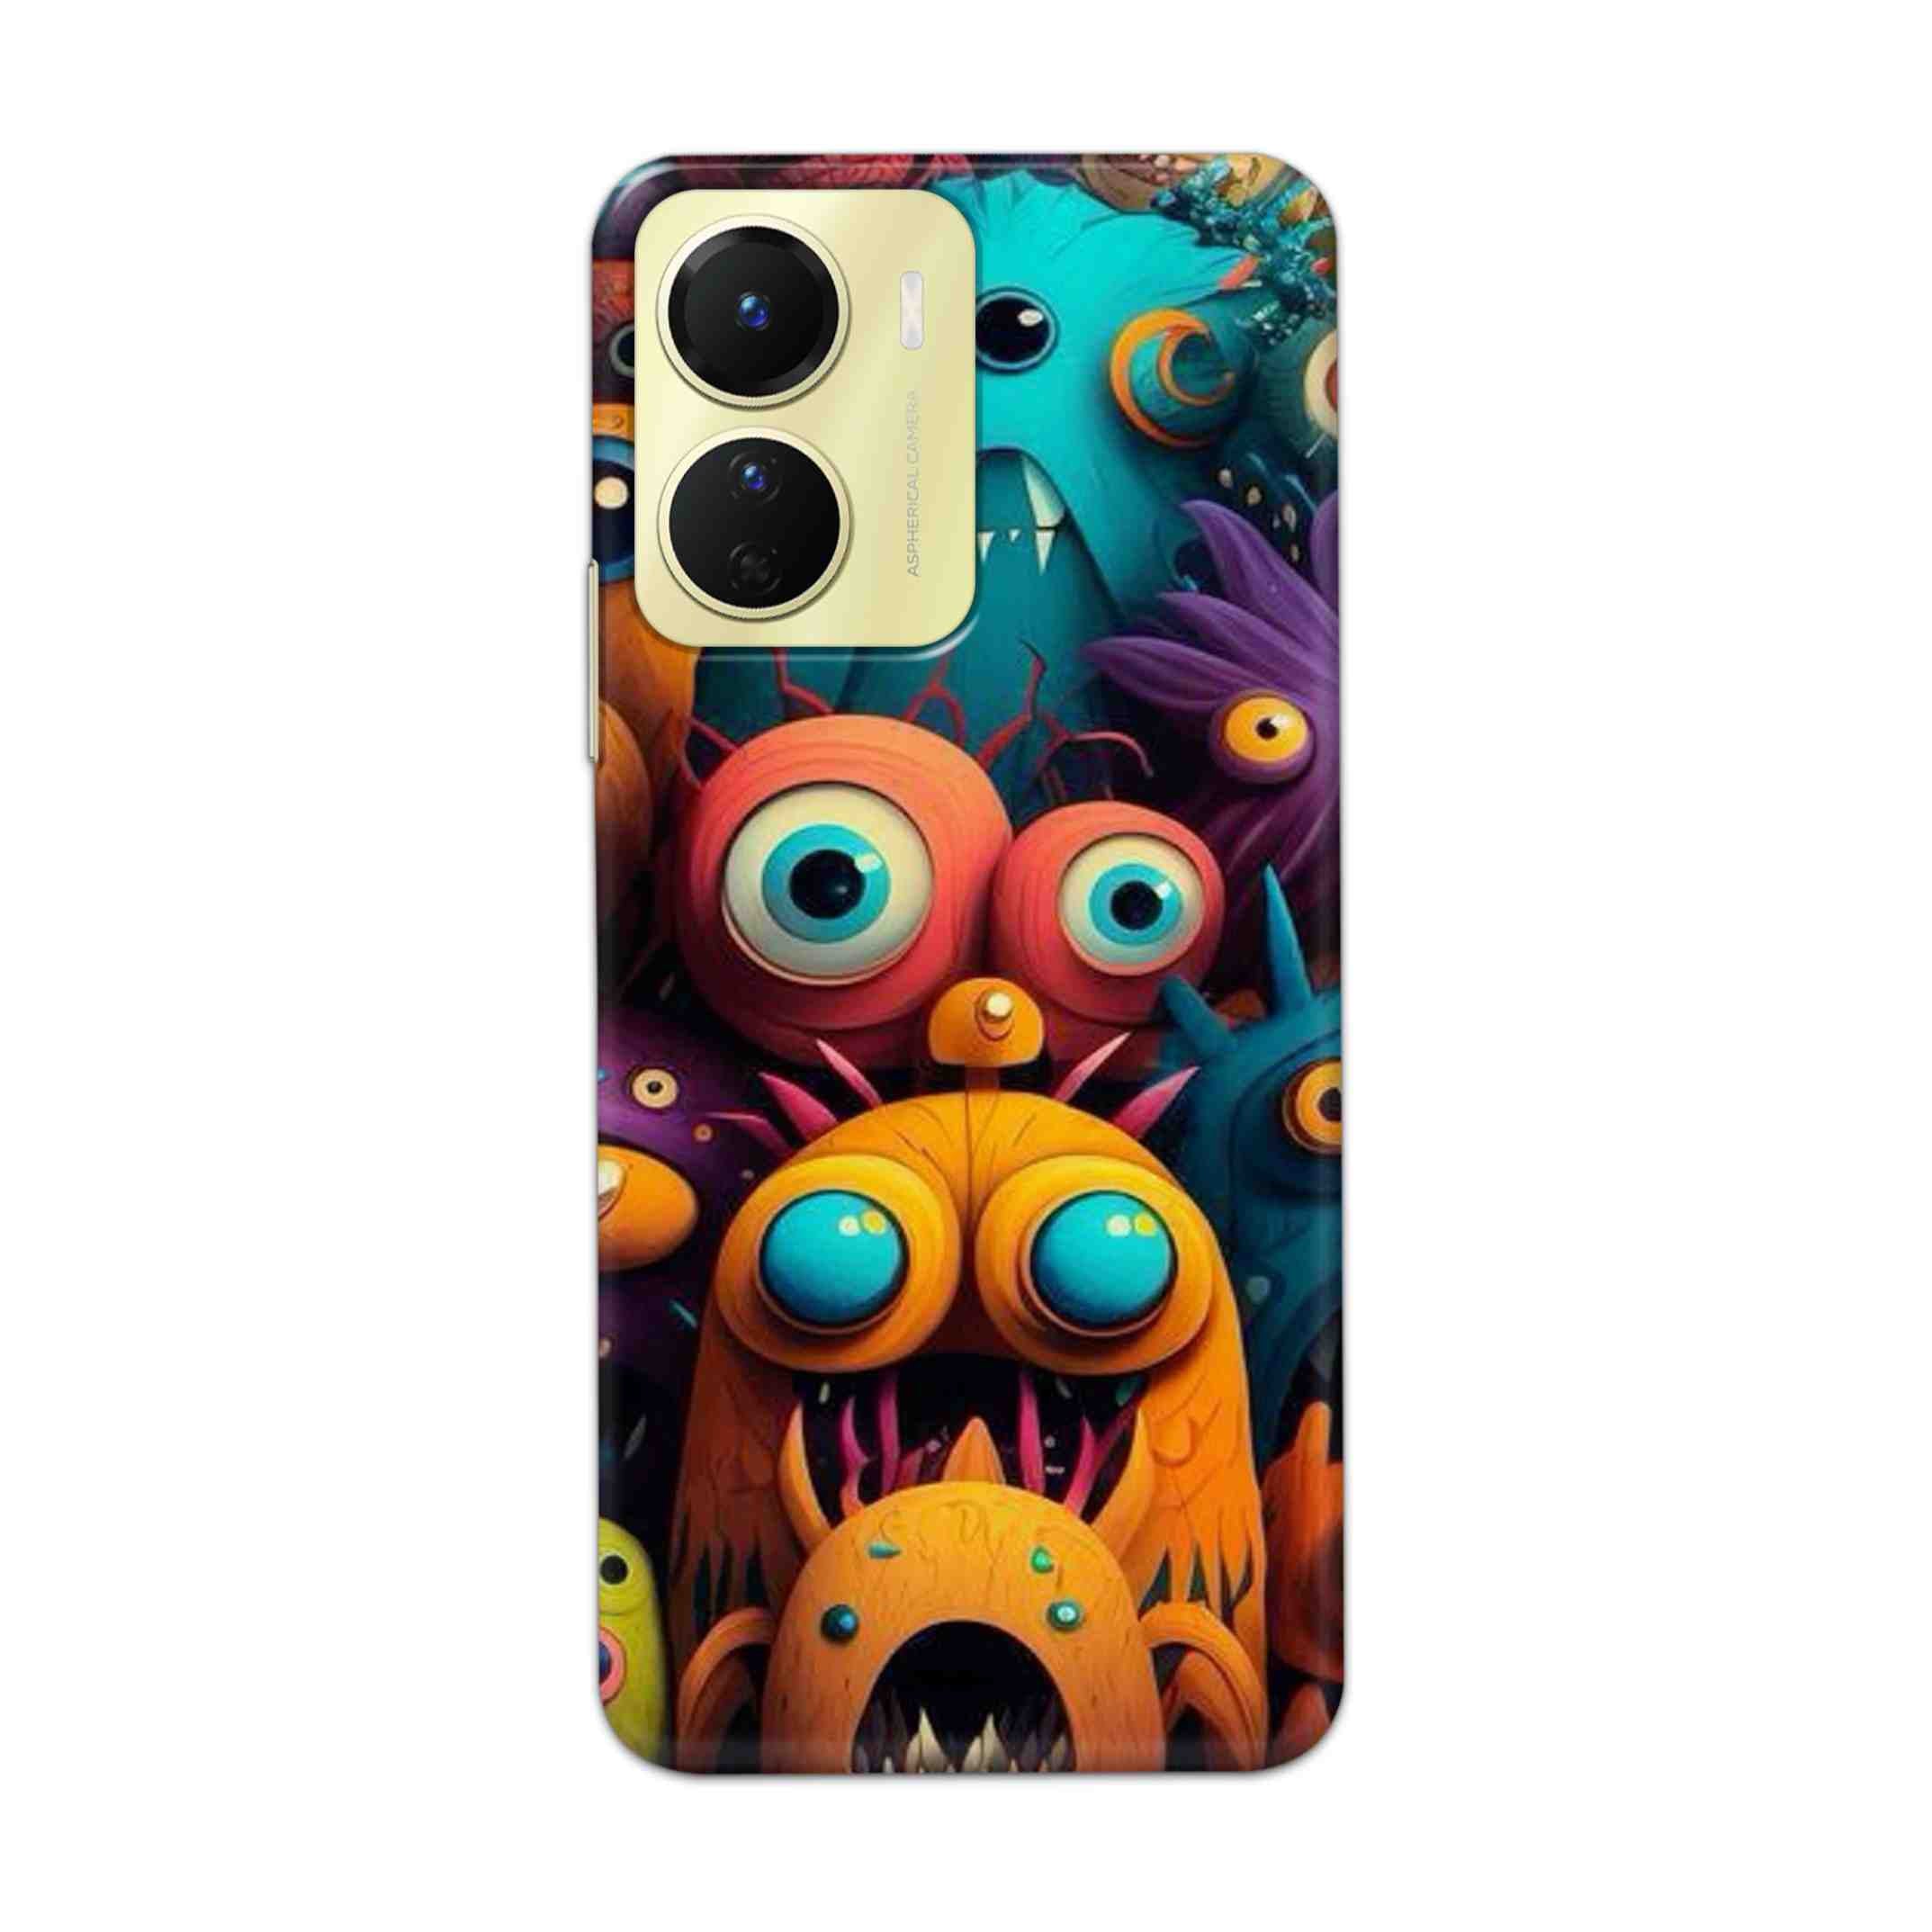 Buy Zombie Hard Back Mobile Phone Case Cover For Vivo Y16 Online